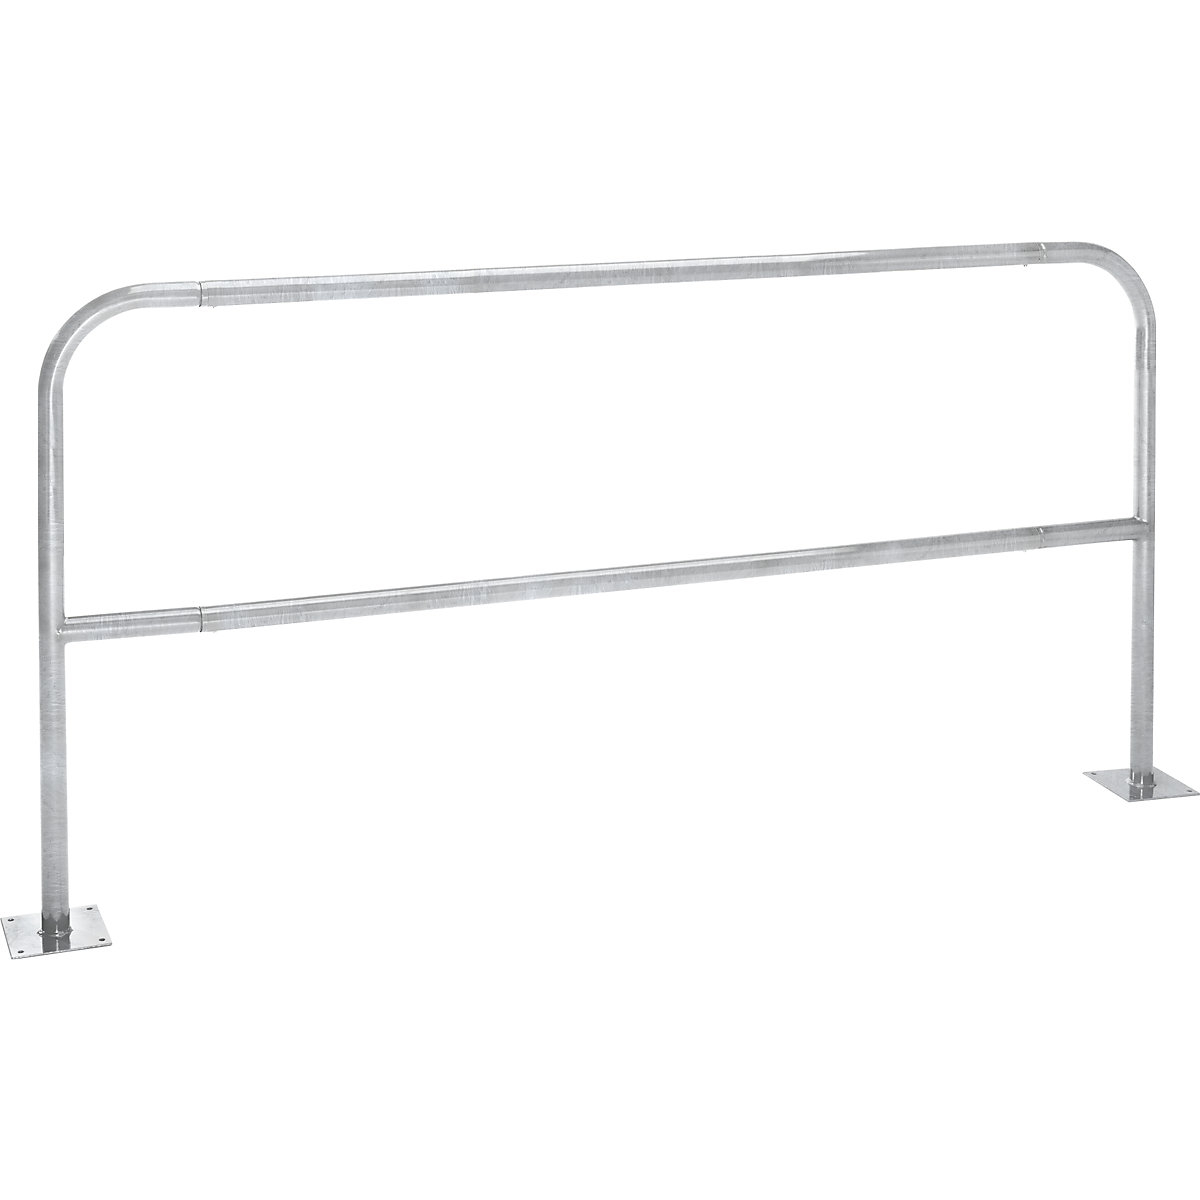 Safety rail for danger zones, to bolt in place, zinc plated, width 2000 mm-7